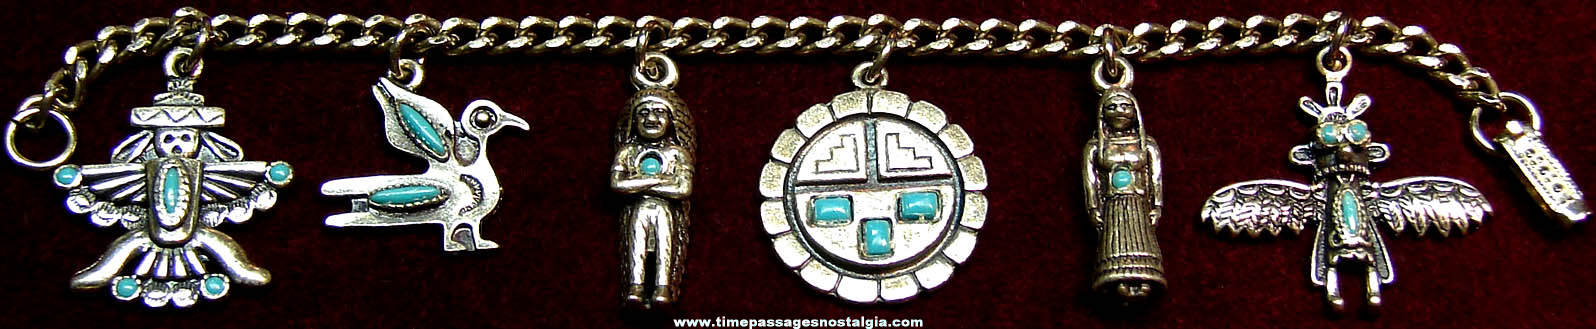 Old Western Native American Indian Theme Charm Bracelet